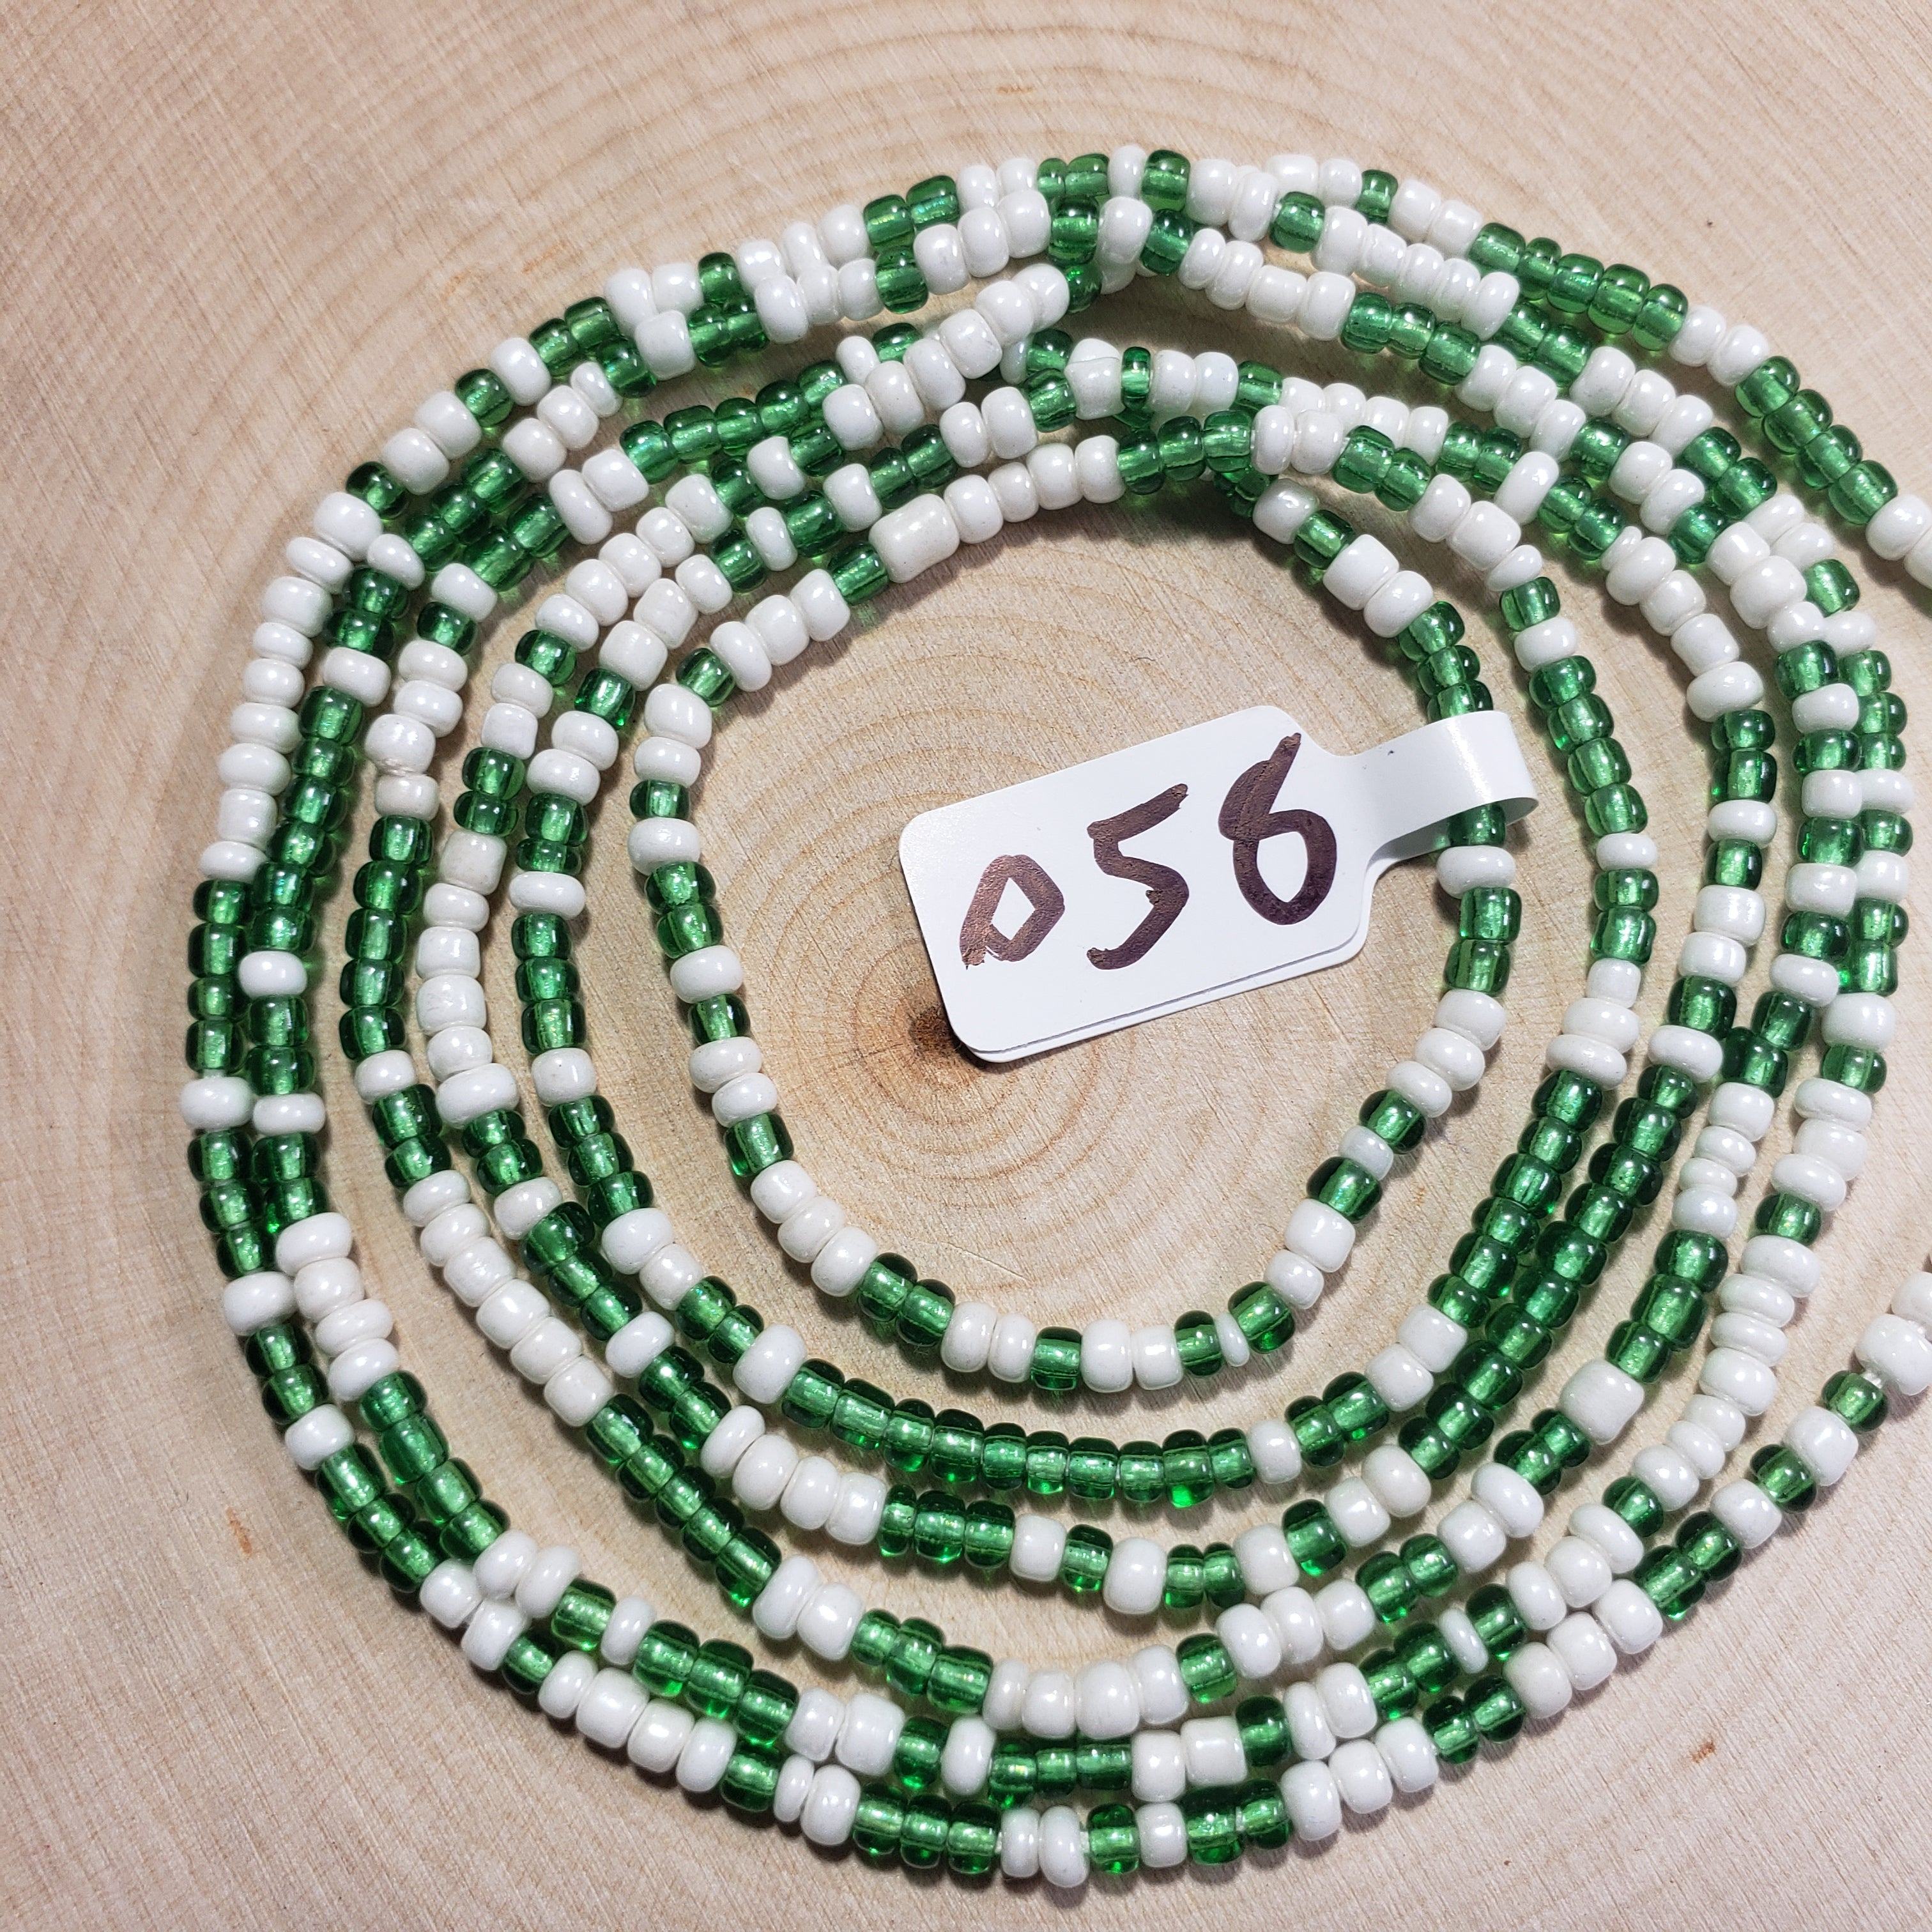 Green and White Round Waist Beads From Beads of Africa